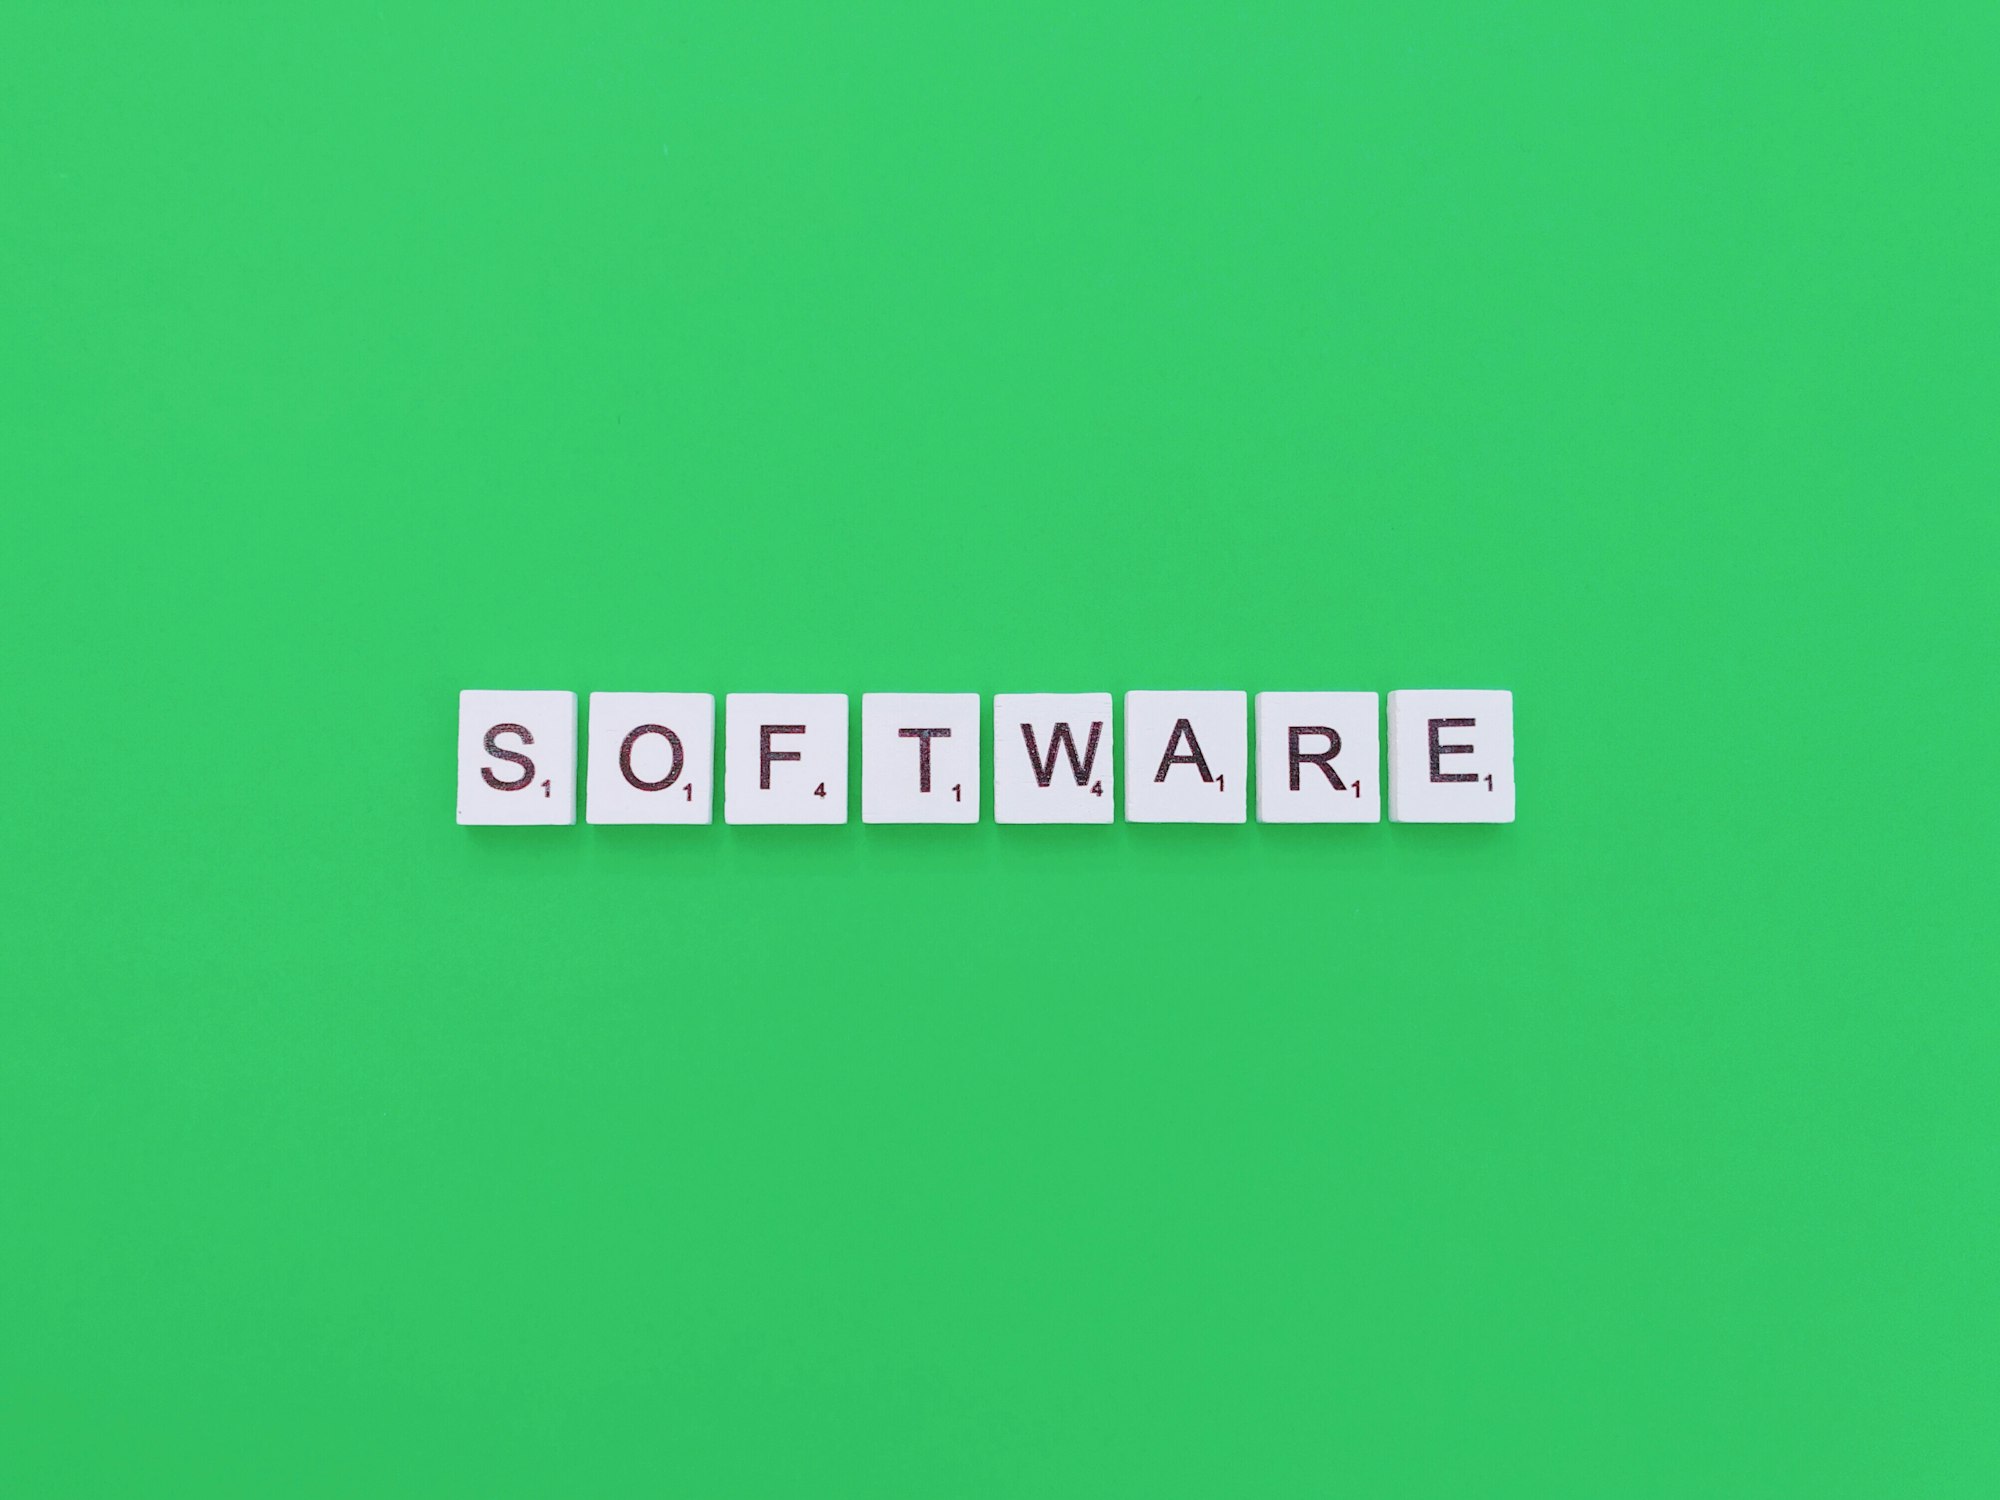 The word "software" in Scrabble tiles on a green background representing our content on the limitations of an ATS.